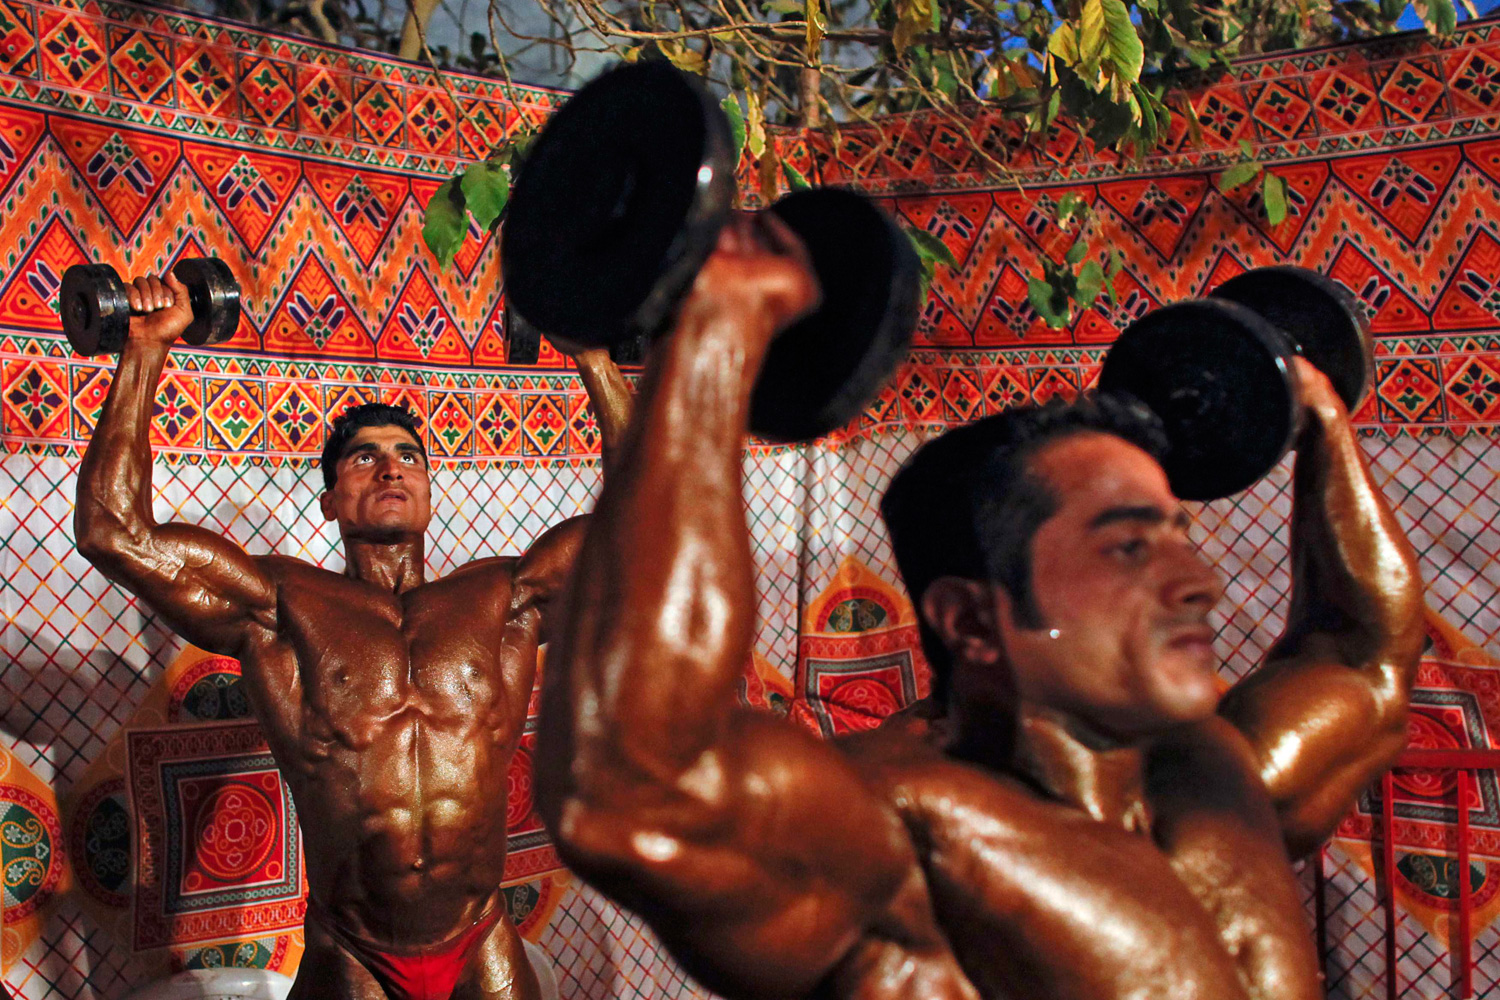 March 31, 2012. Competitors warm up backstage during a body building competition in Mumbai.